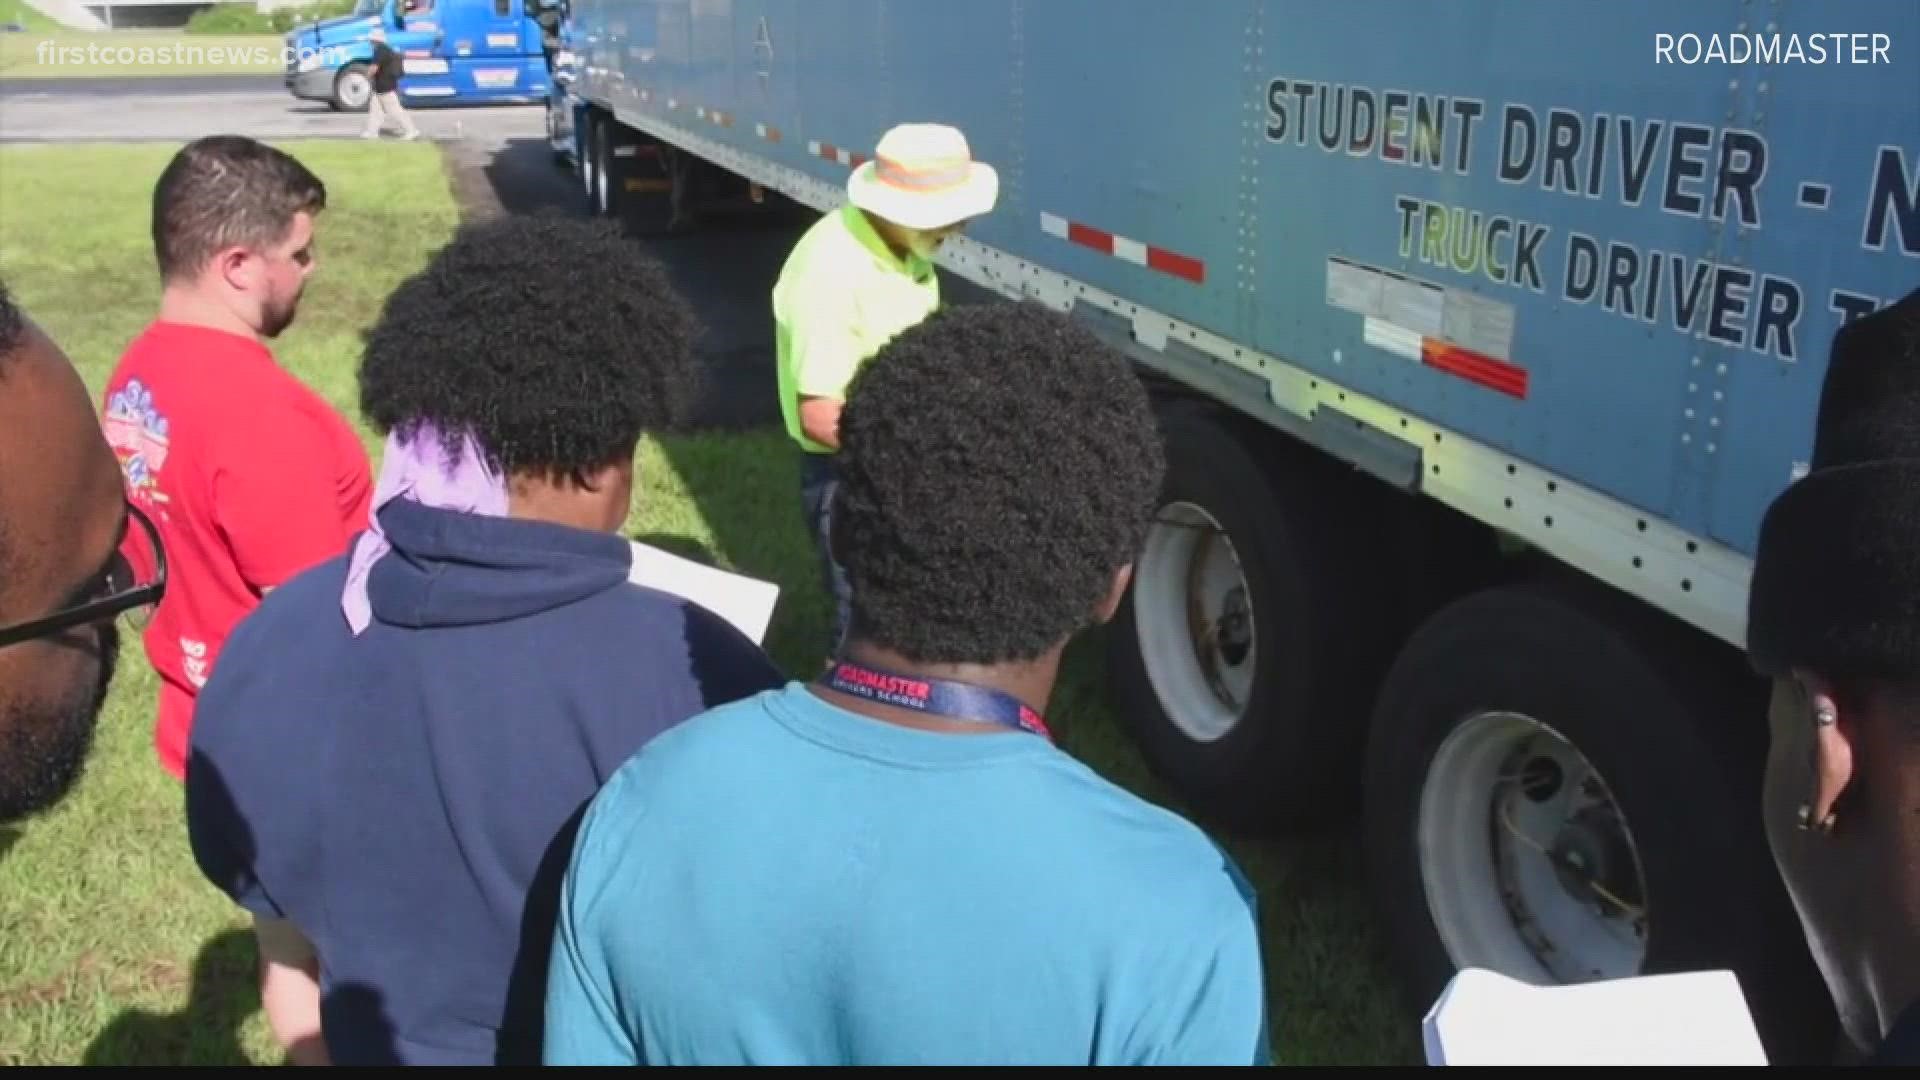 Millions of dollars are now going to Florida State College at Jacksonville so they can enroll 60 percent more students in their truck driving program.